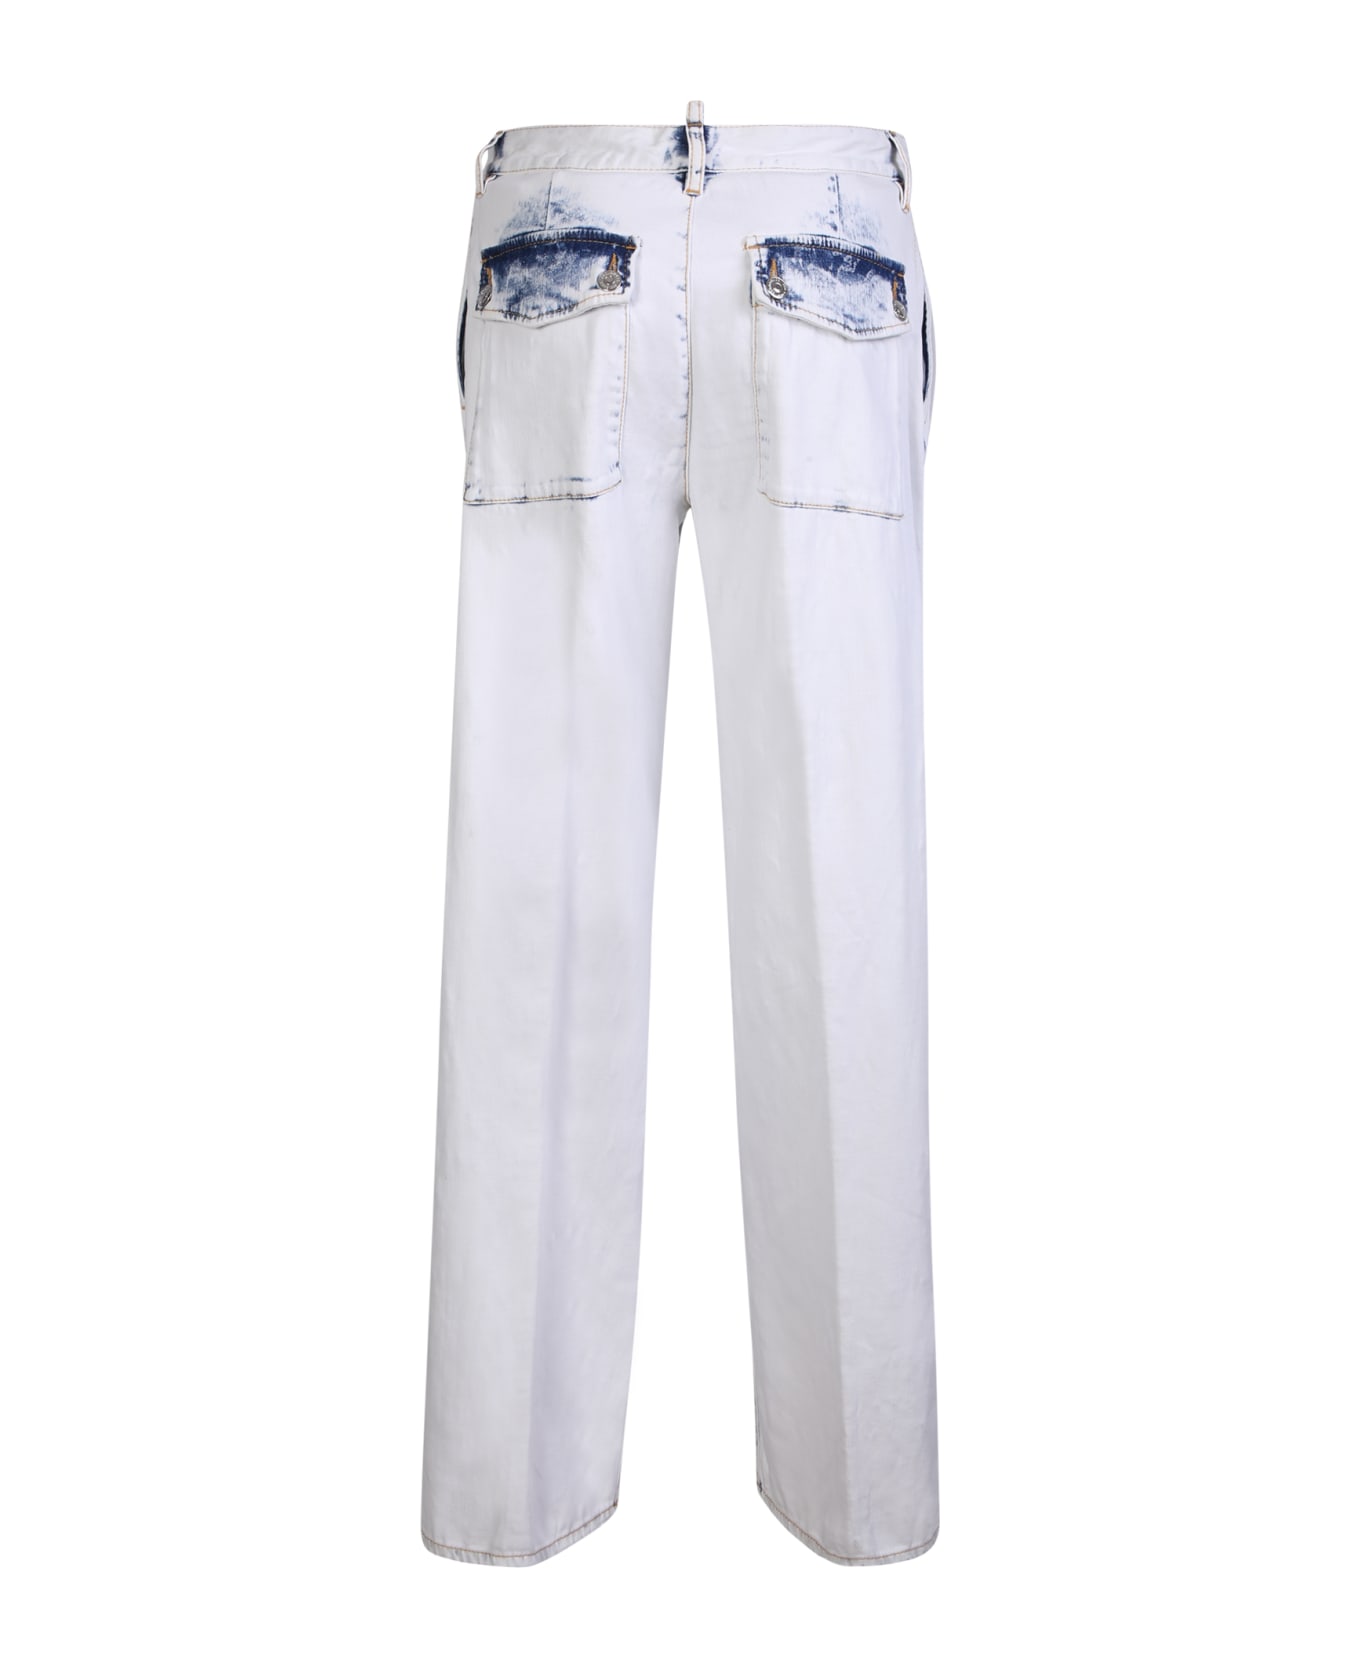 Dsquared2 Faded High Waist Jeans - Blue